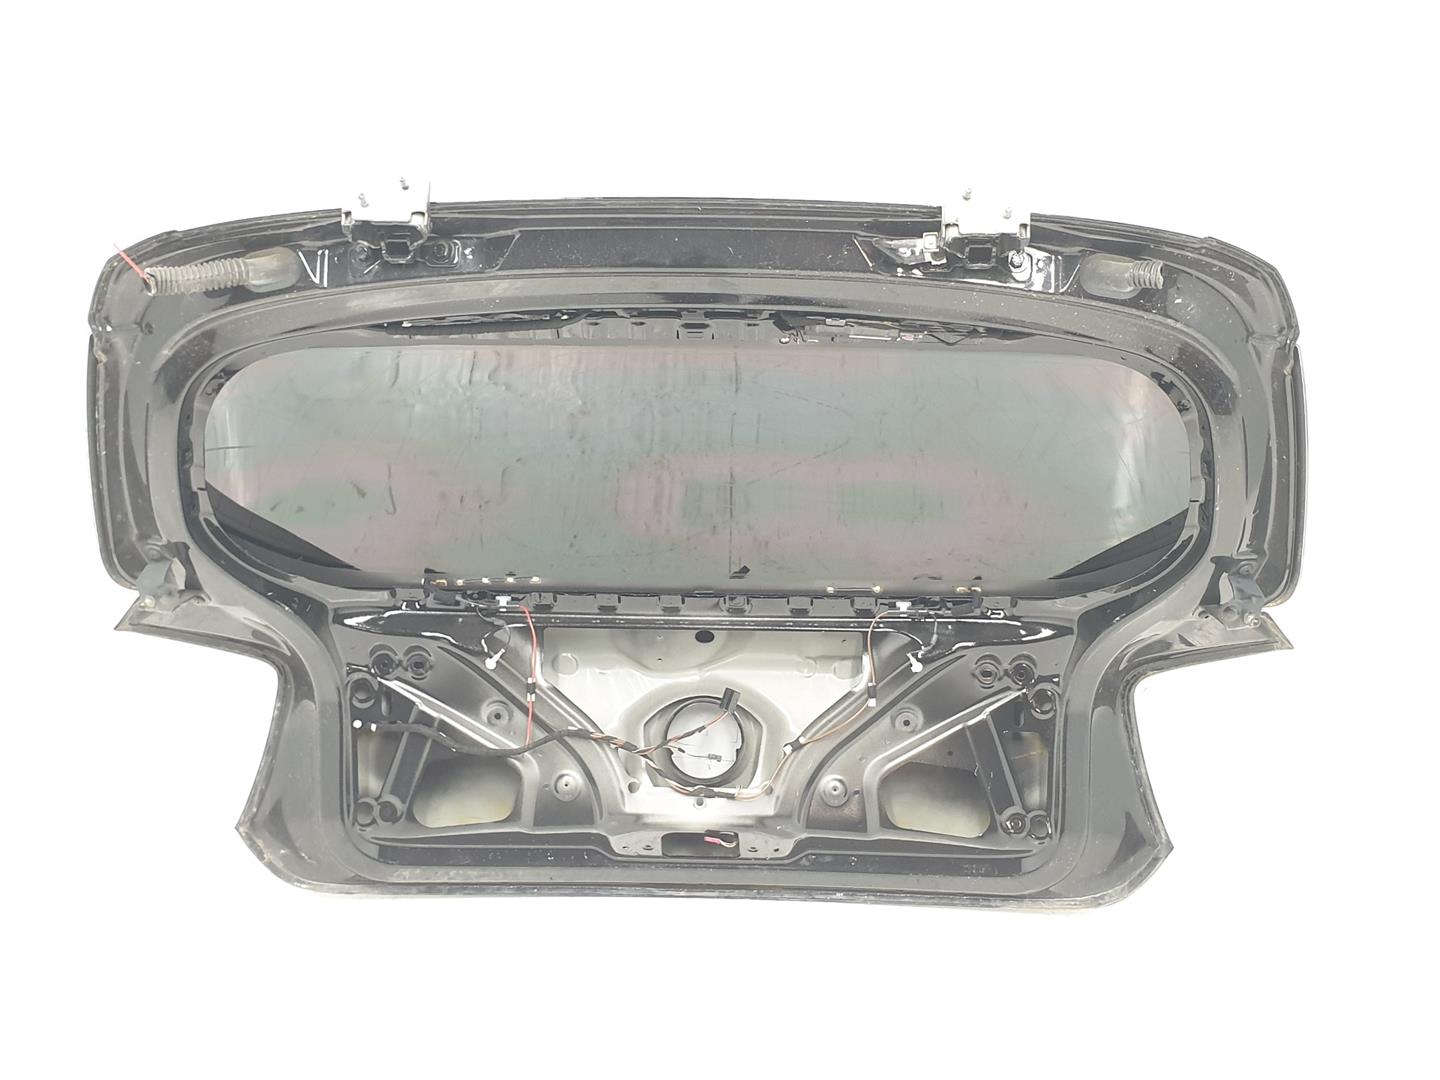 BMW 1 Series F20/F21 (2011-2020) Bootlid Rear Boot 7305470, 41007305470, COLORNEGRO668 24772313